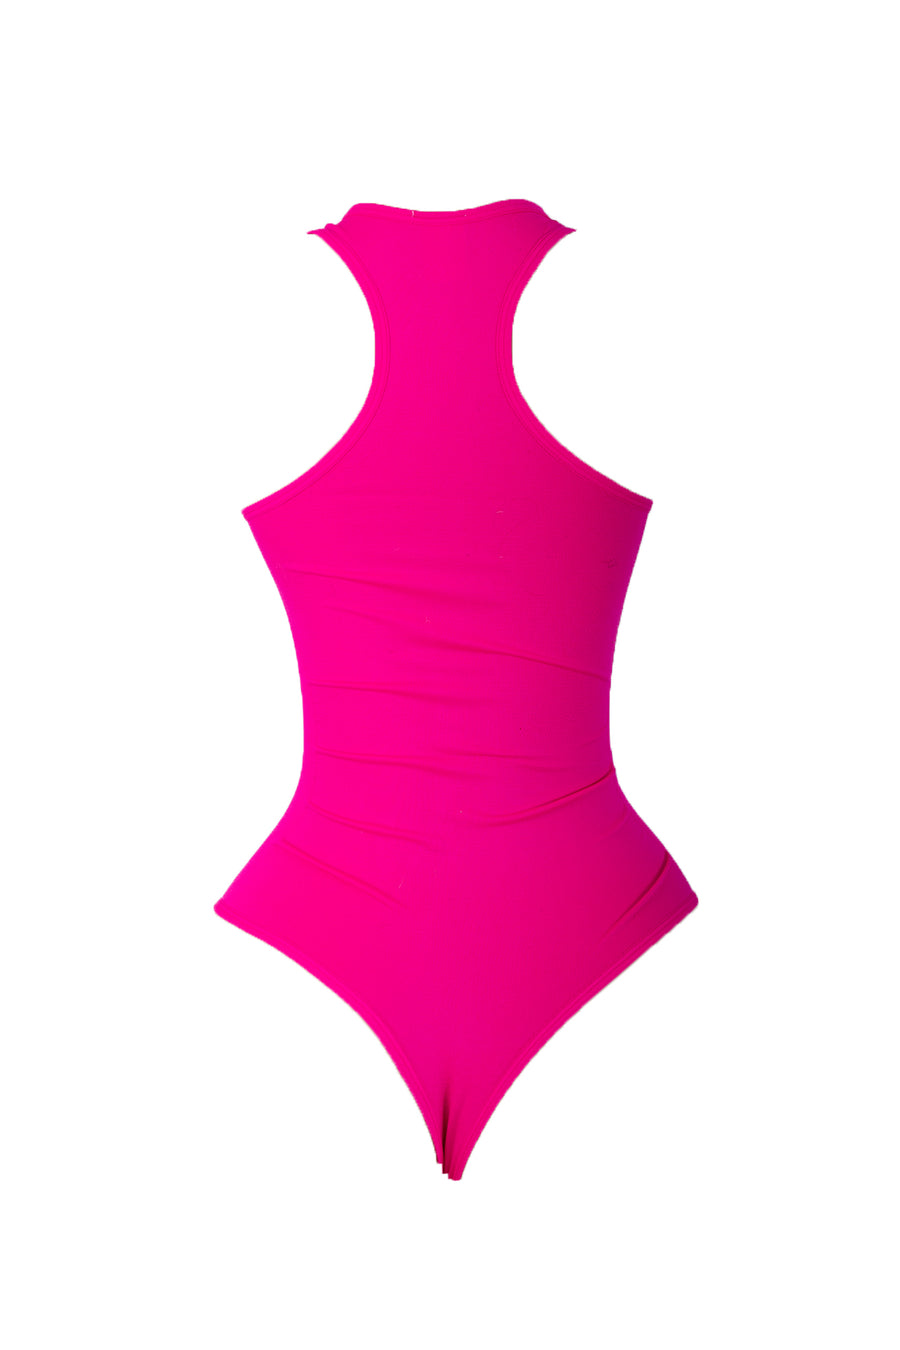 NEON PINK Body By Babes Thong Bodysuit w/ Tummy Control fits up to plus